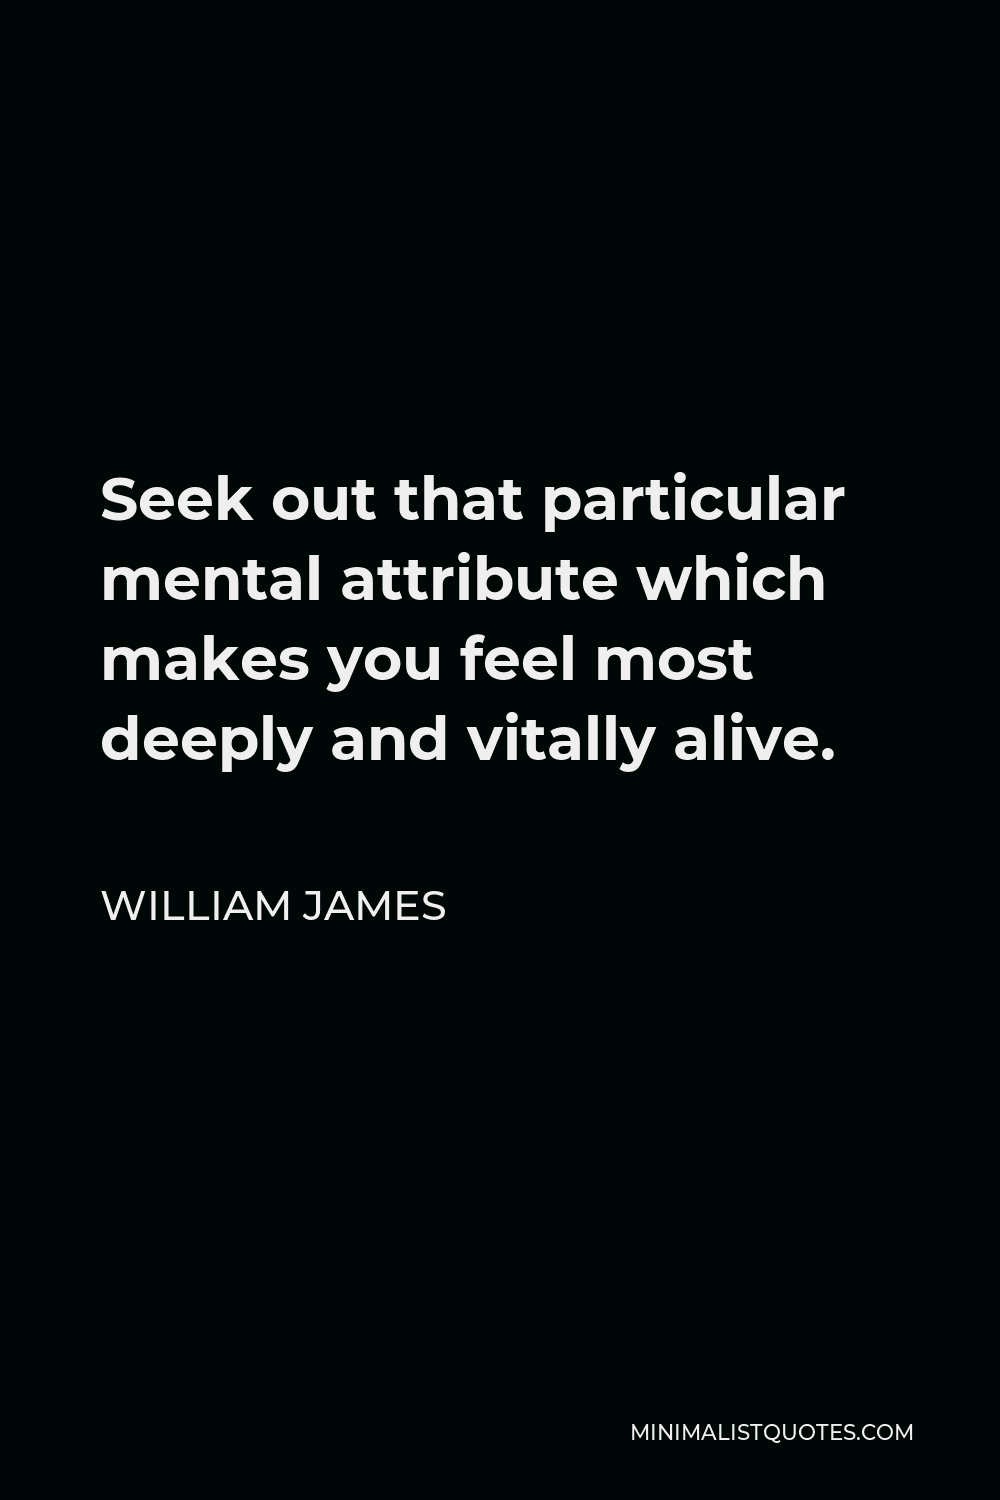 William James Quote - Seek out that particular mental attribute which makes you feel most deeply and vitally alive.